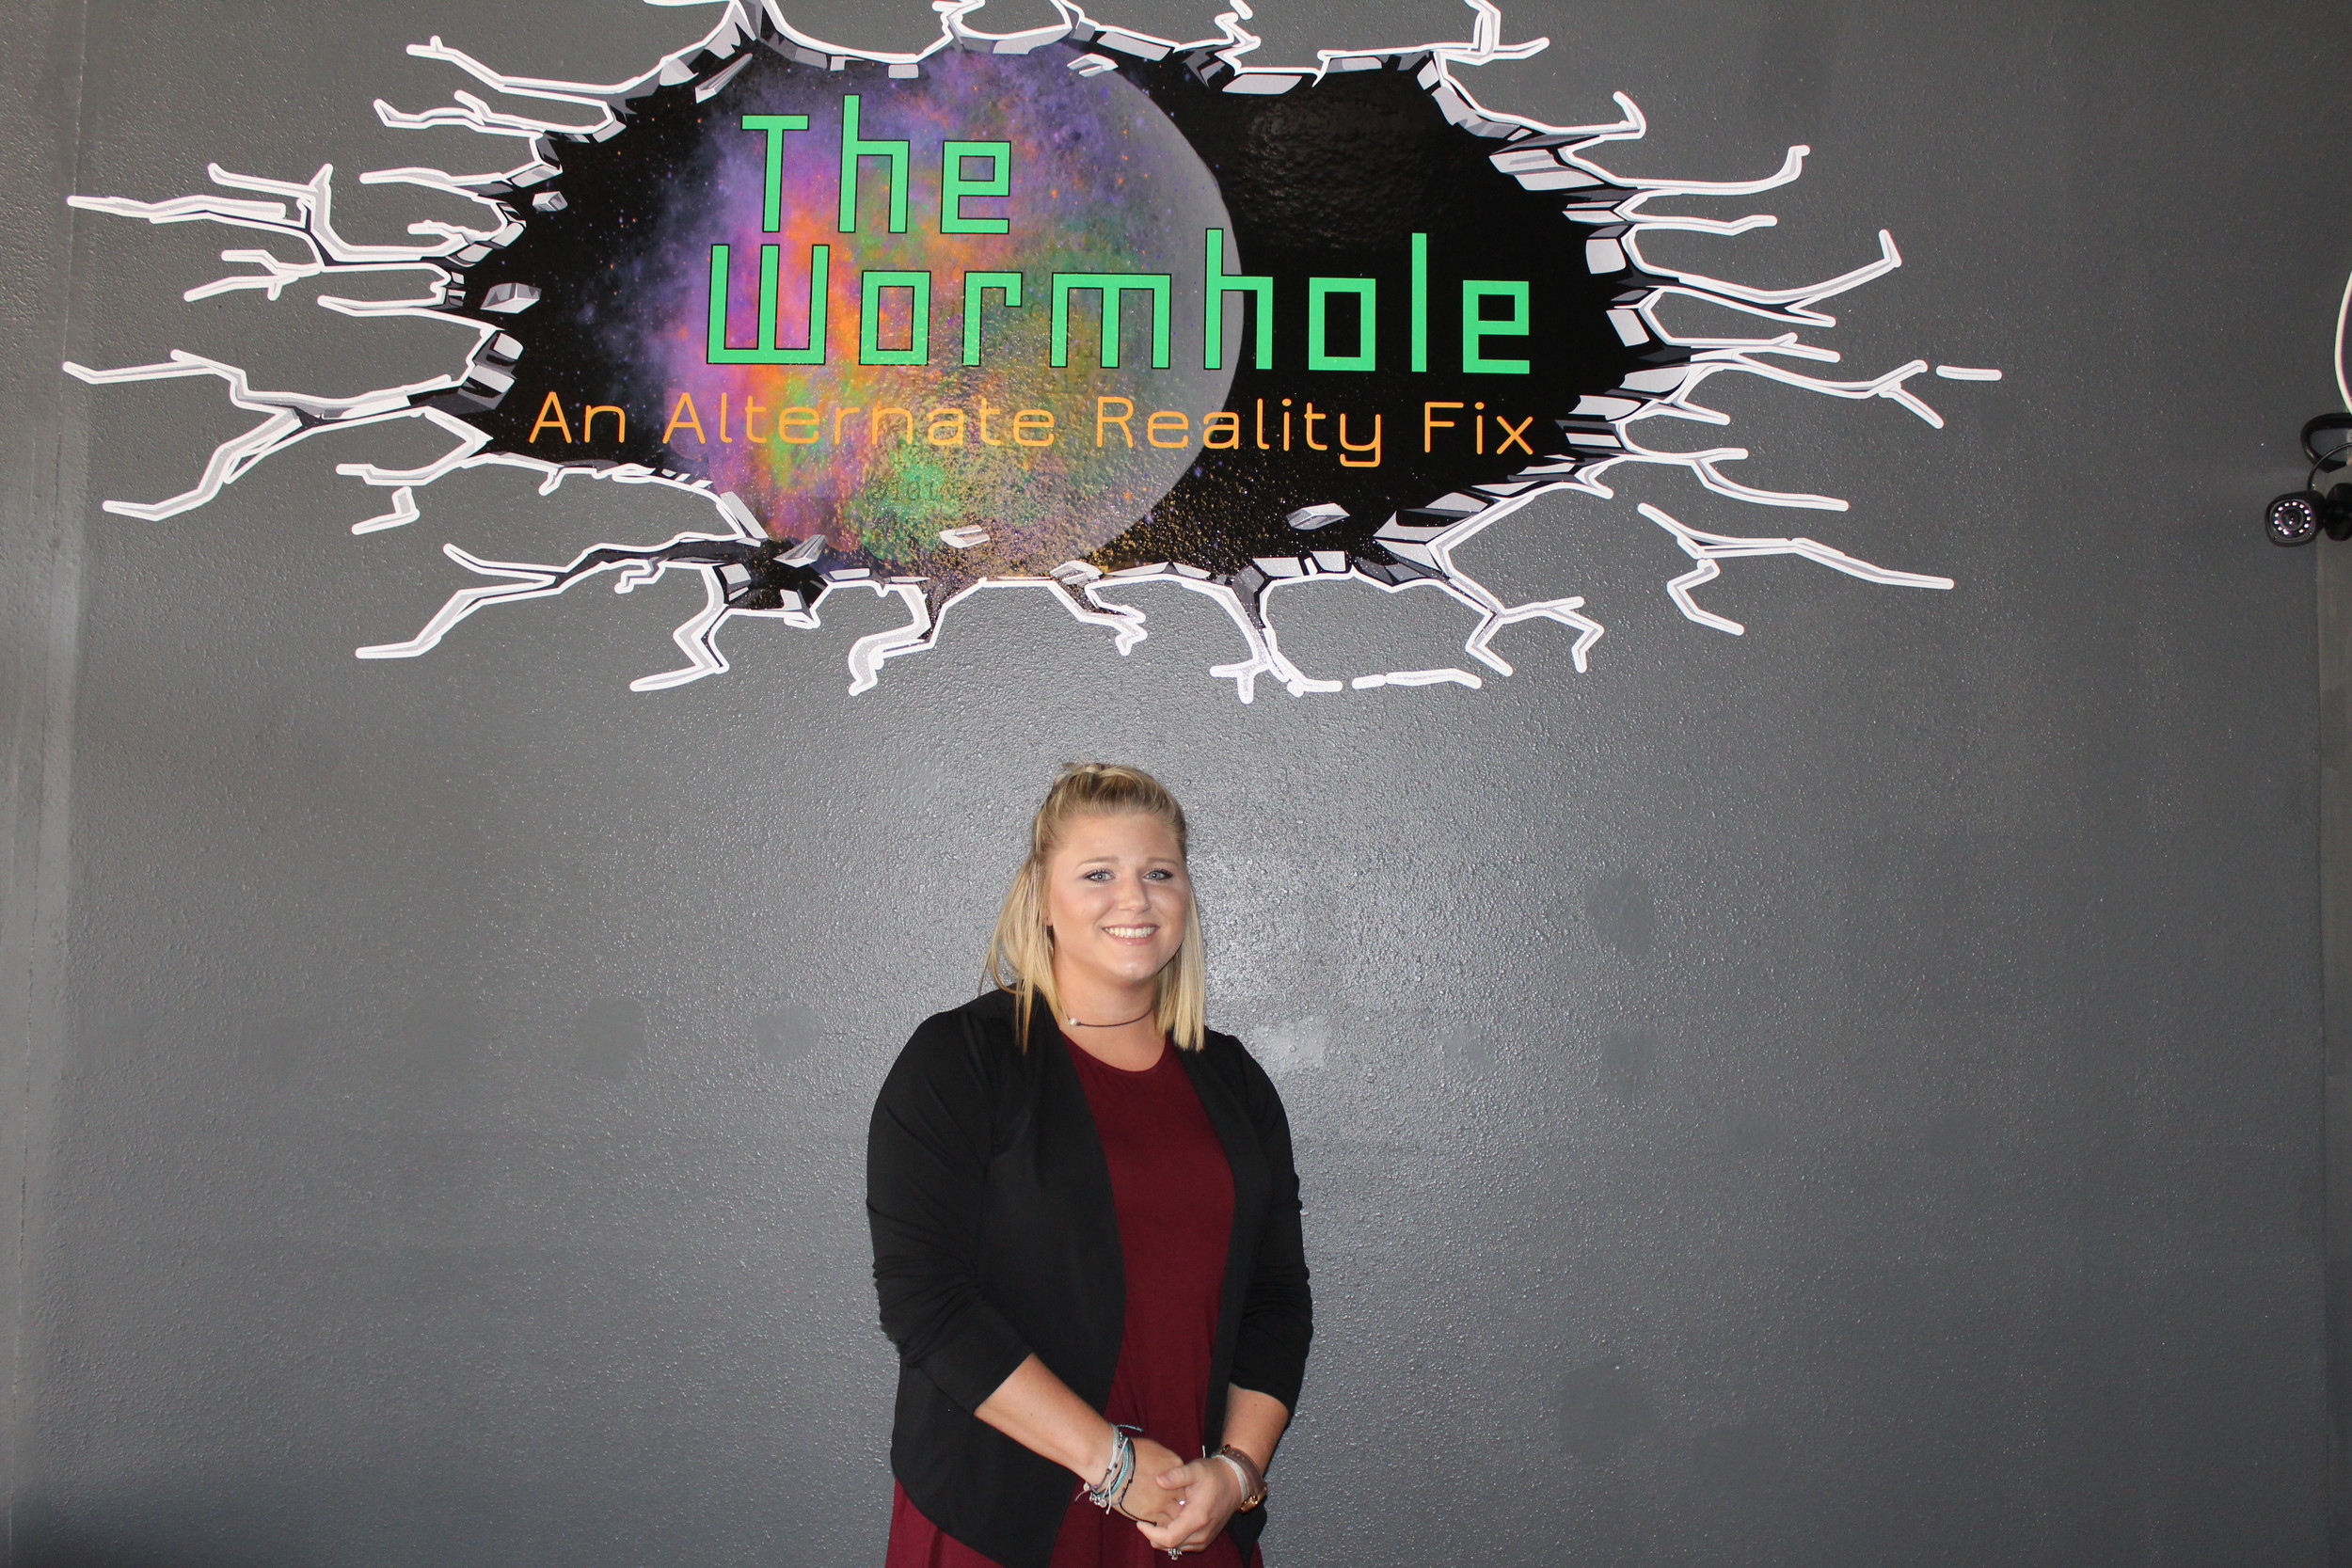 Lauren Lowery, co-owner of The Wormhole, under the logo of her design. Lauren and her husband, Shane, have brought Baldwin County a fun and exciting gaming opportunity.